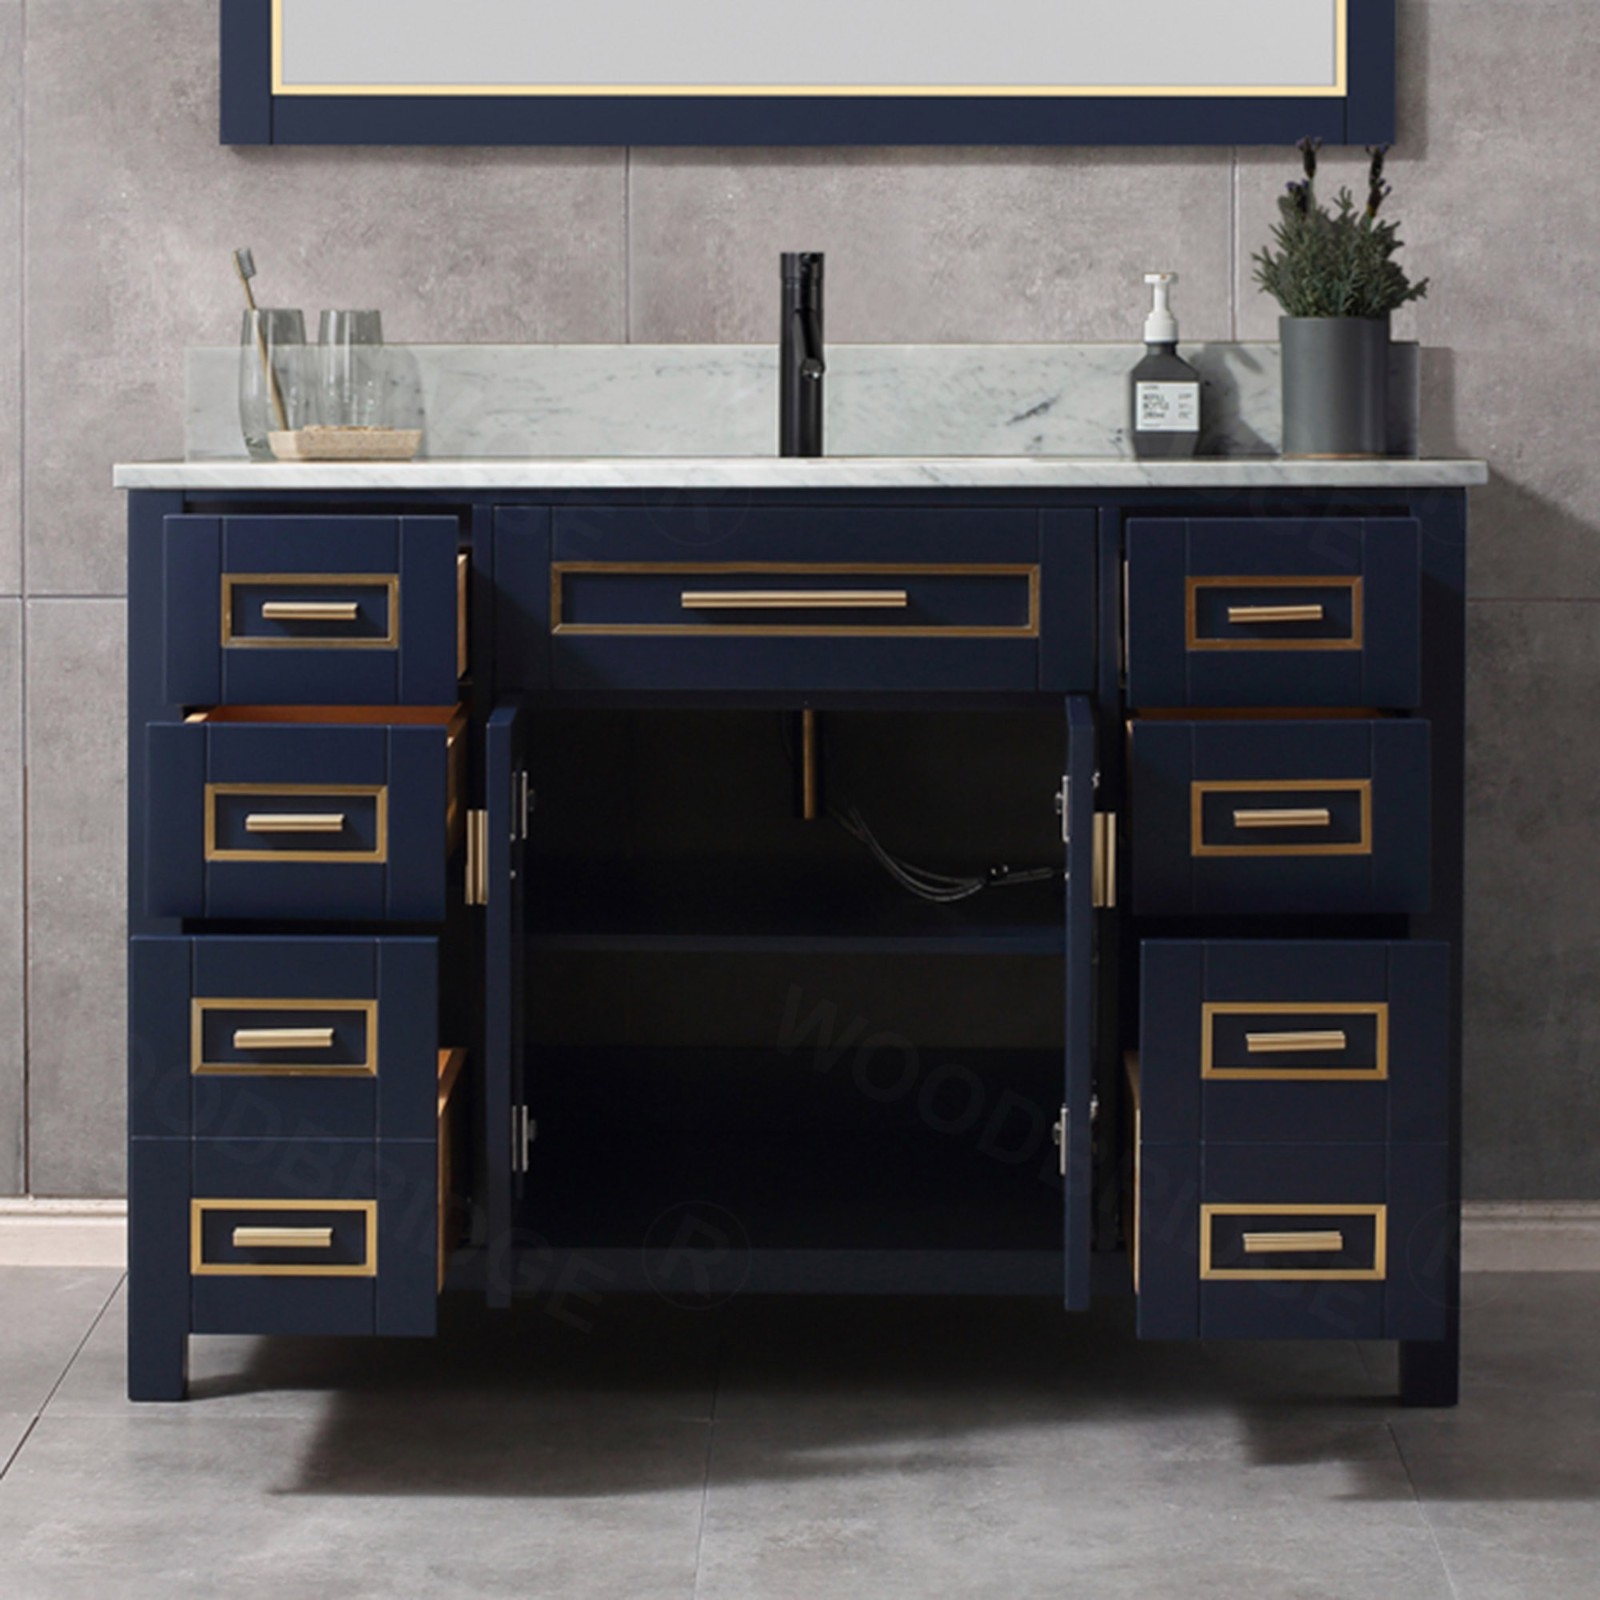  WOODBRIDGE Milan  49” Floor Mounted Single Basin Vanity Set with Solid Wood Cabinet in Navy Blue, and Carrara White Marble Vanity Top with Pre-installed Undermount Rectangle Bathroom Sink in White, Pre-Drilled Single Faucet Hole_4744